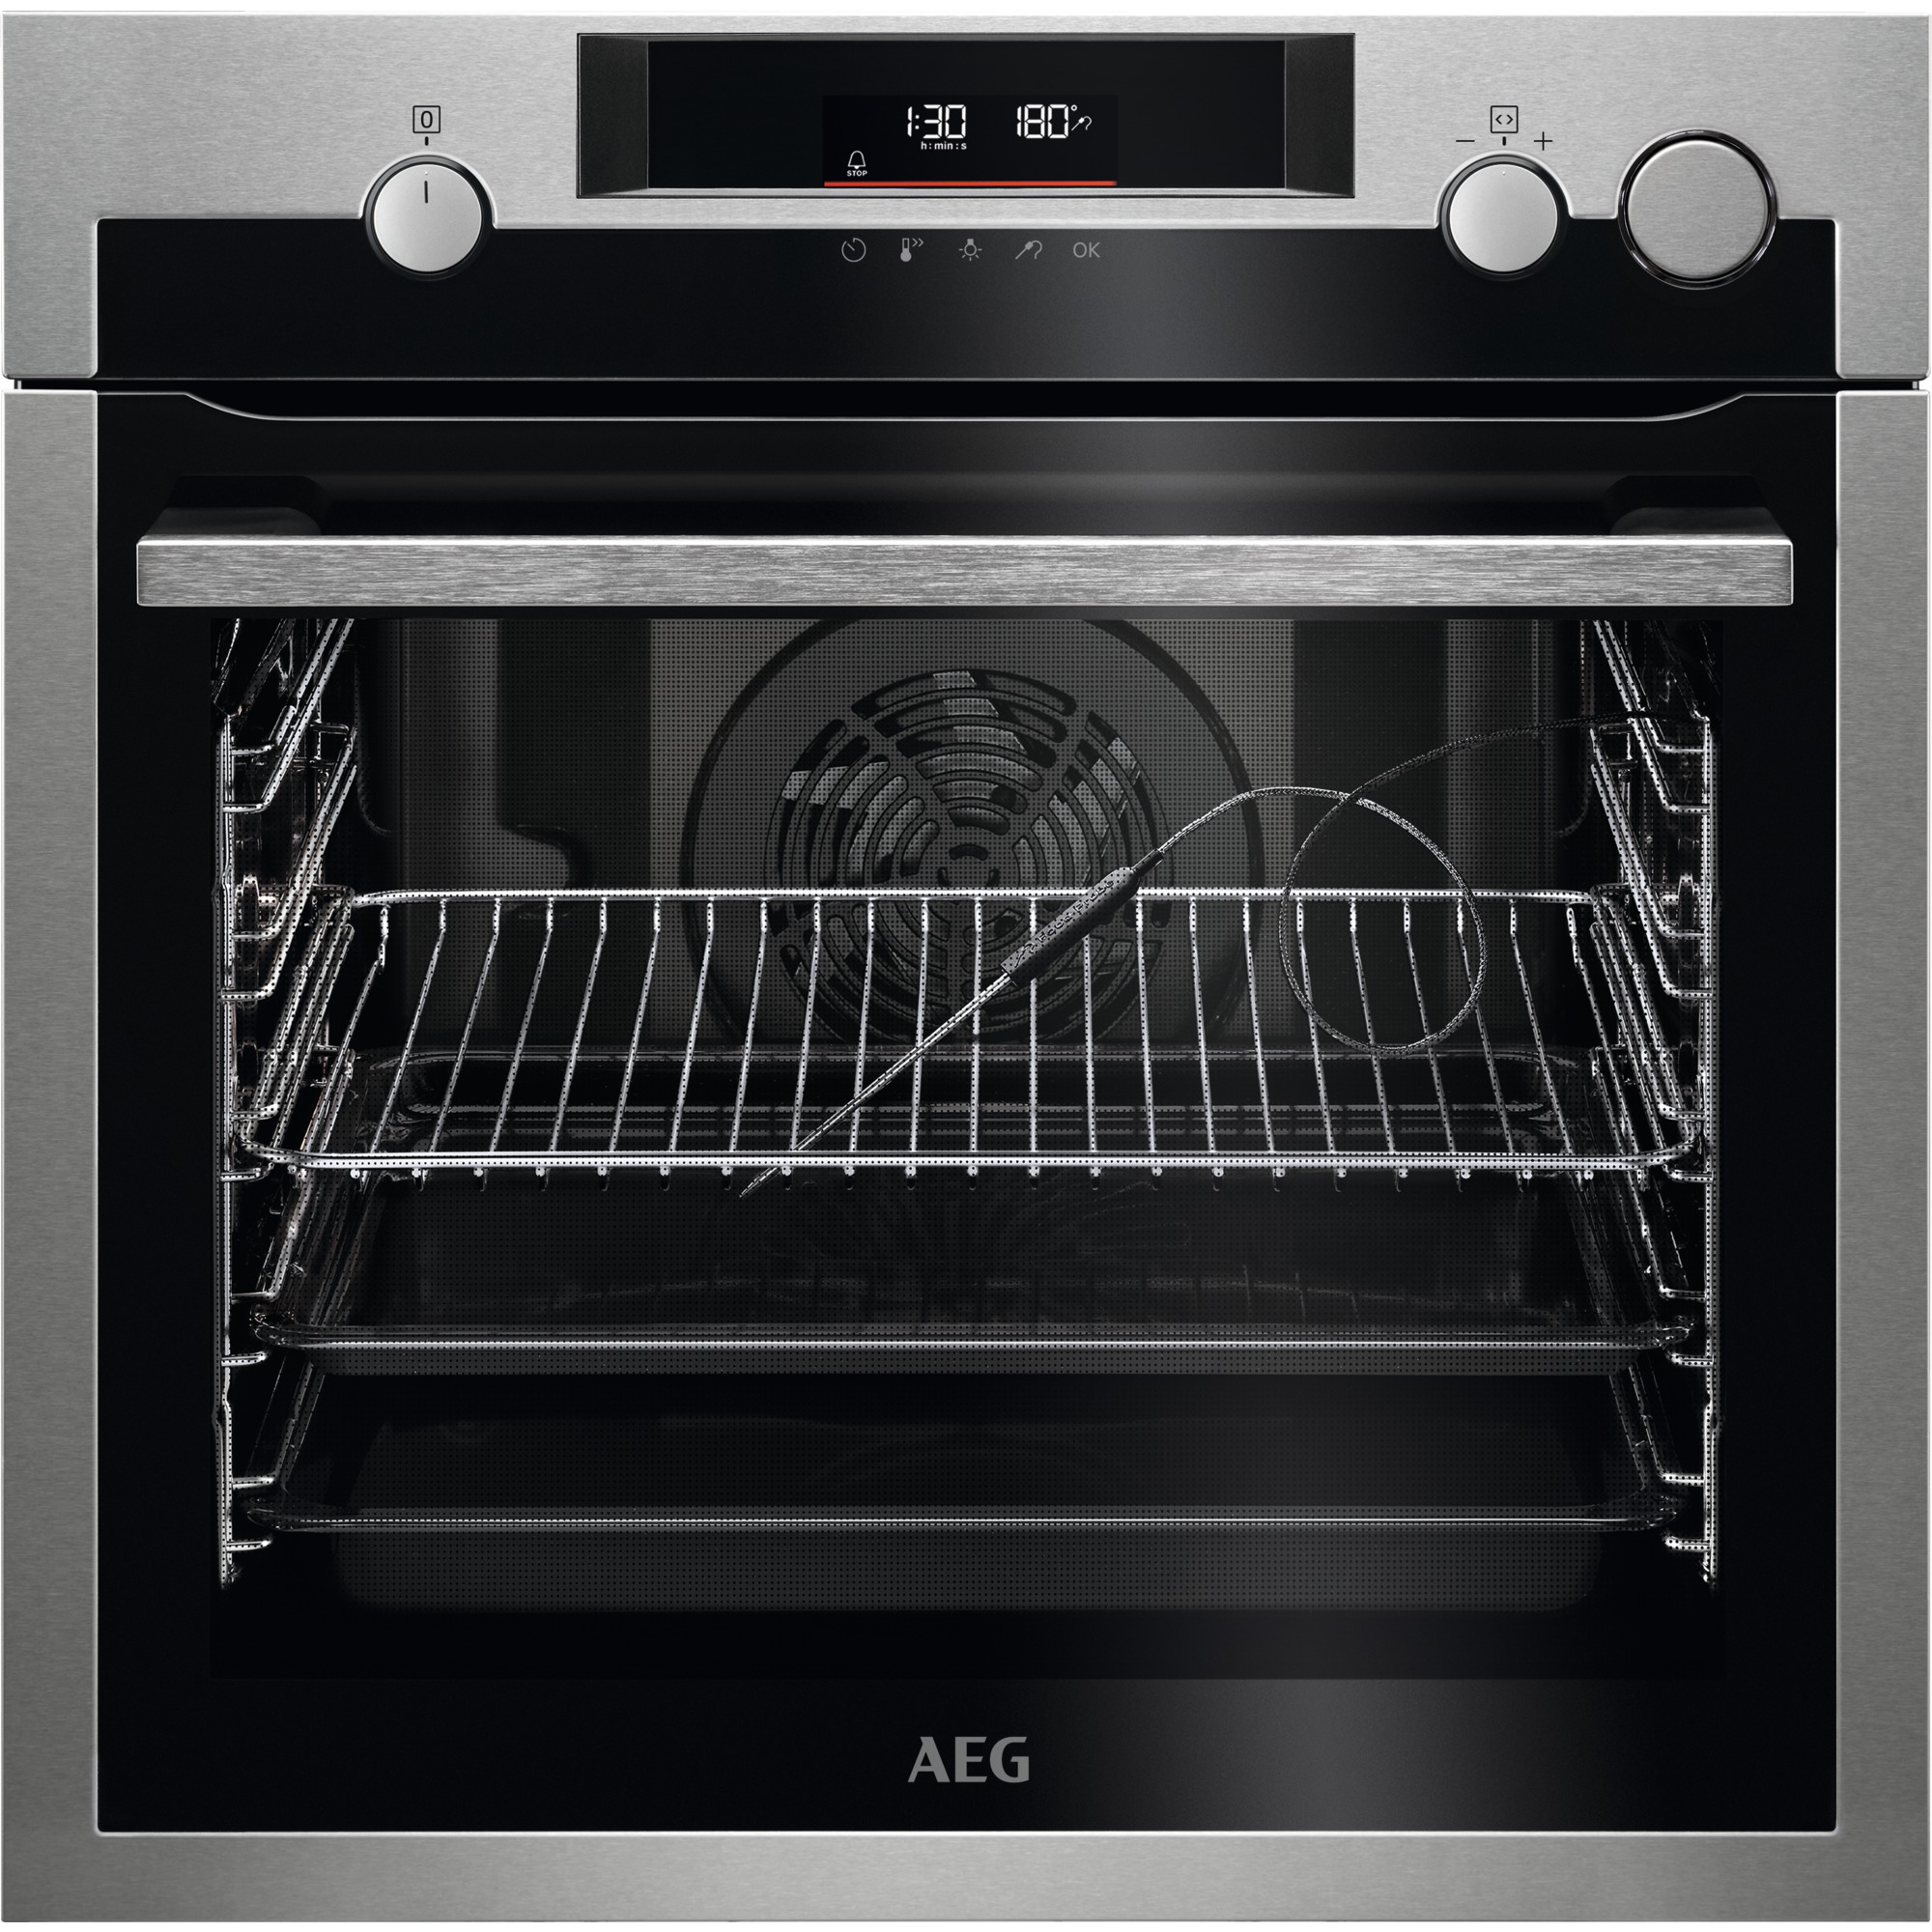 AEG Built-In Single Electric SteamCrisp Steam Oven